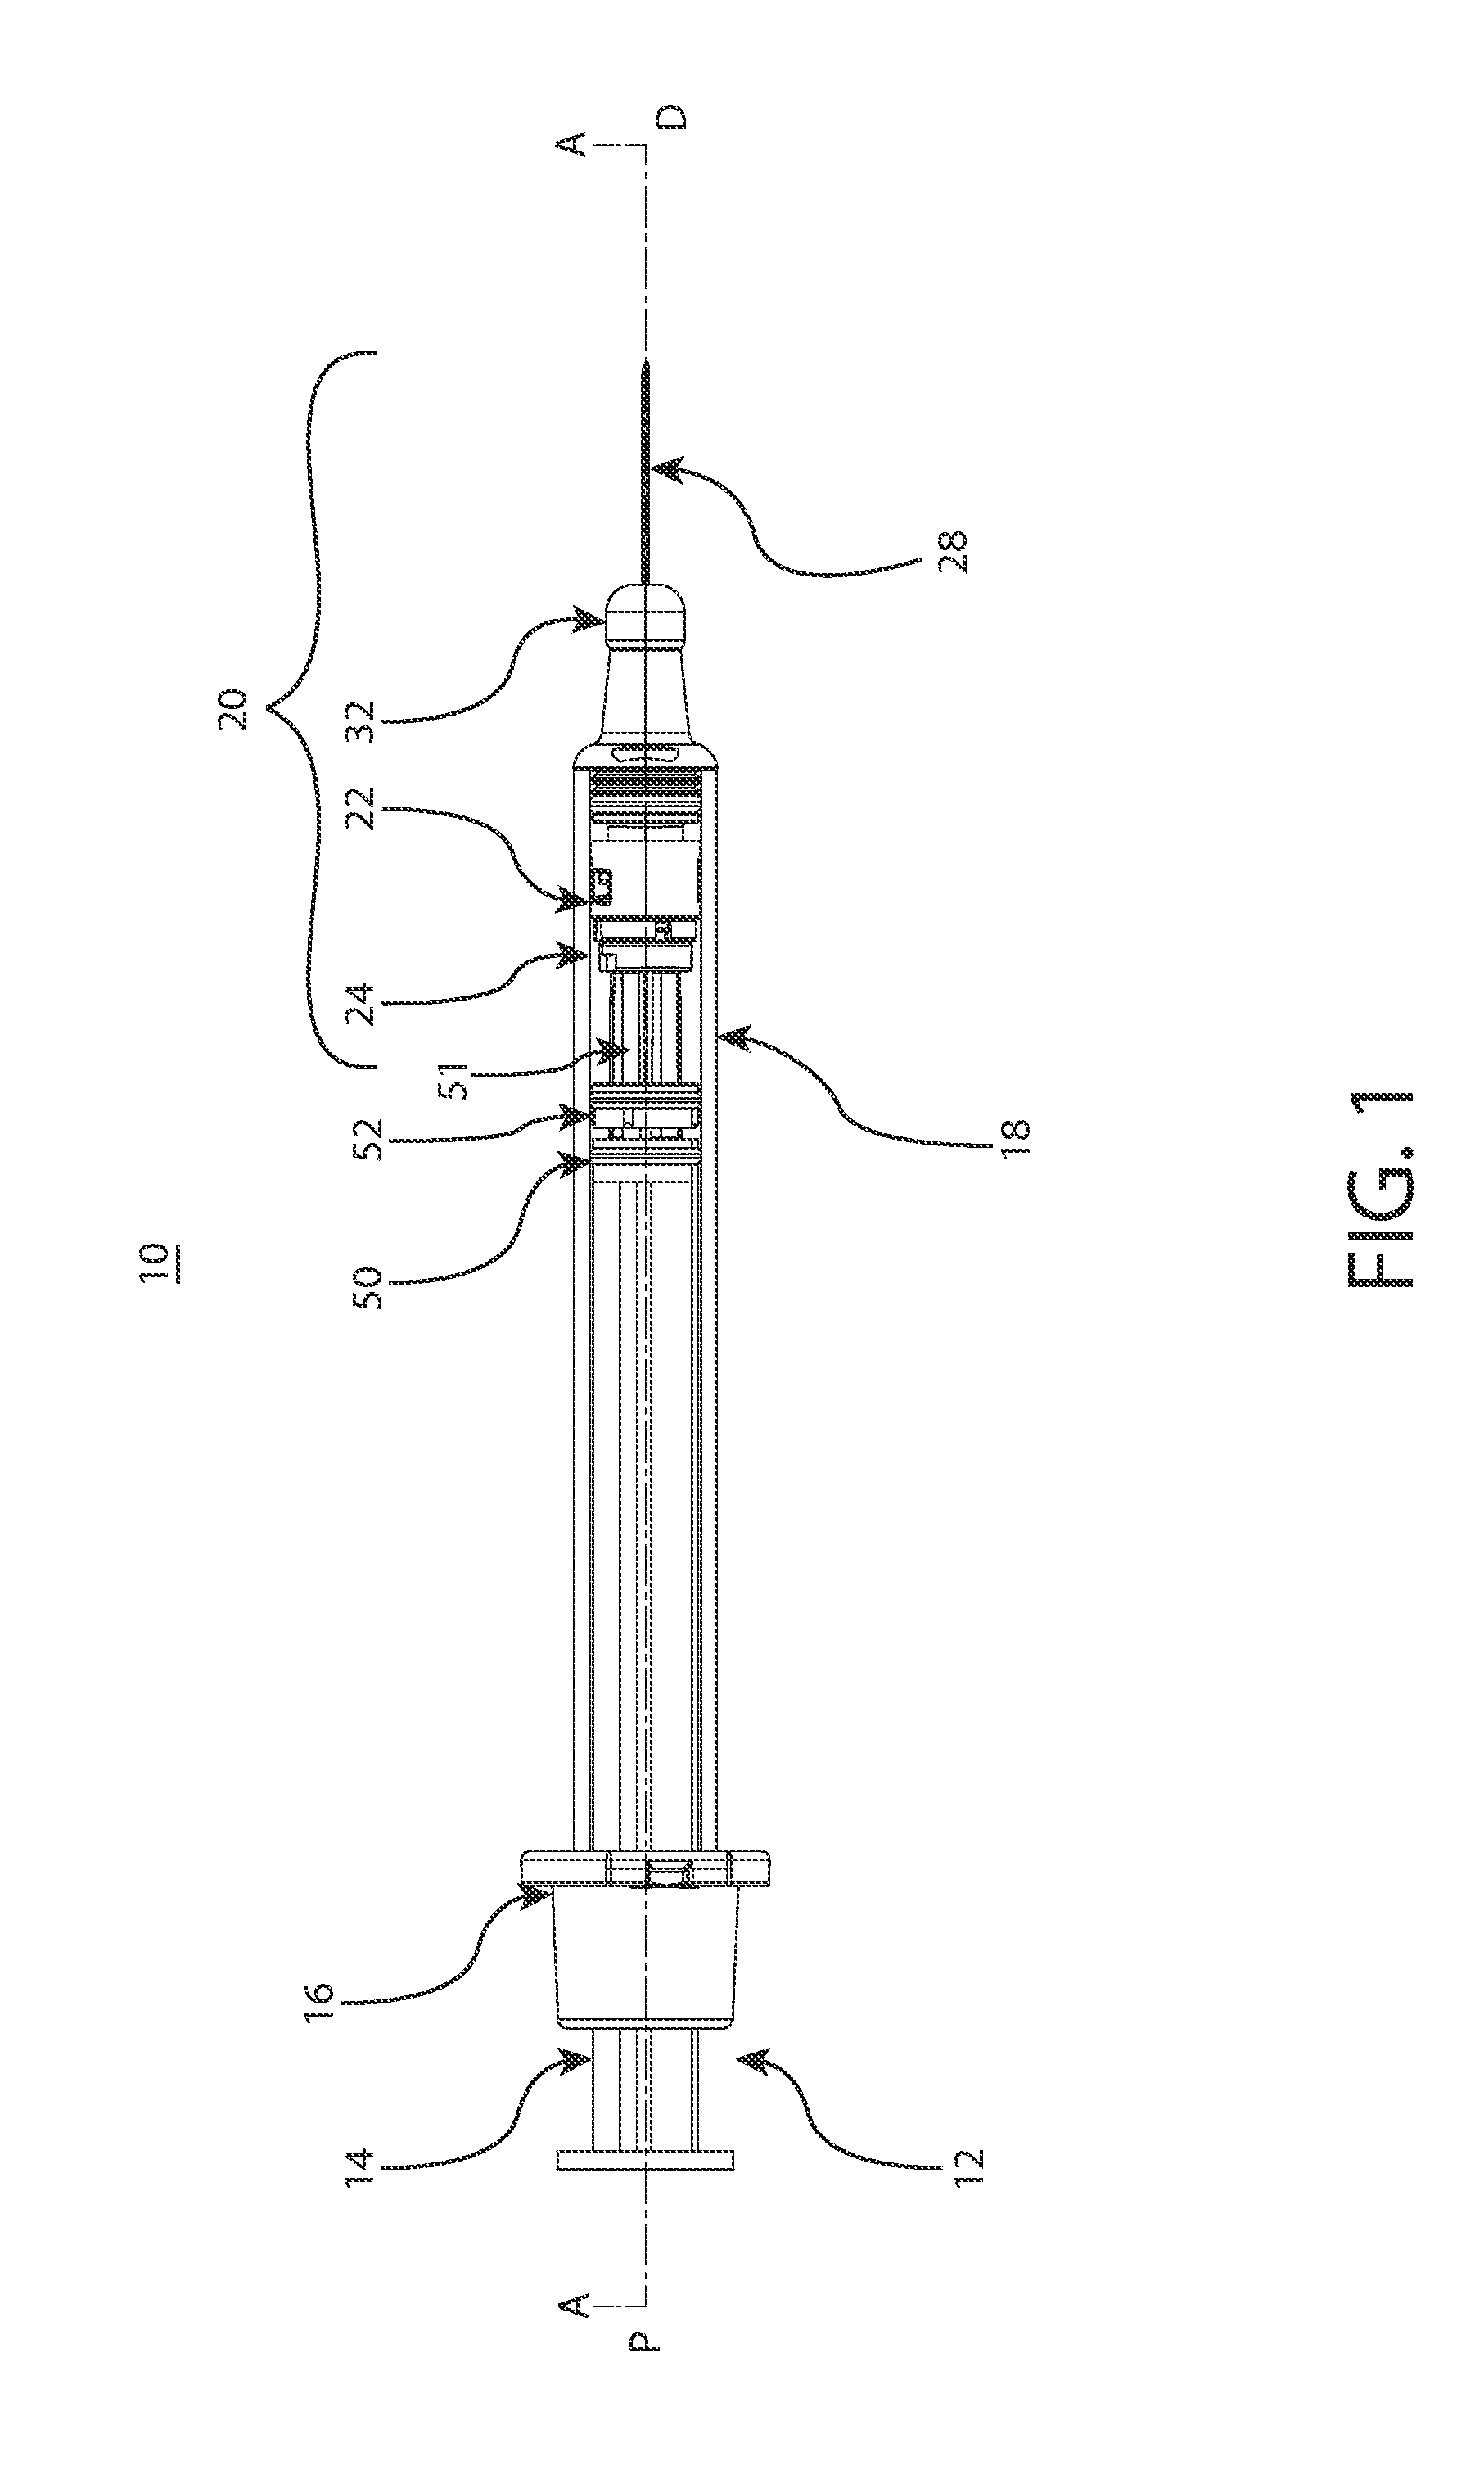 Devices for targeted delivery of therapeutic implants